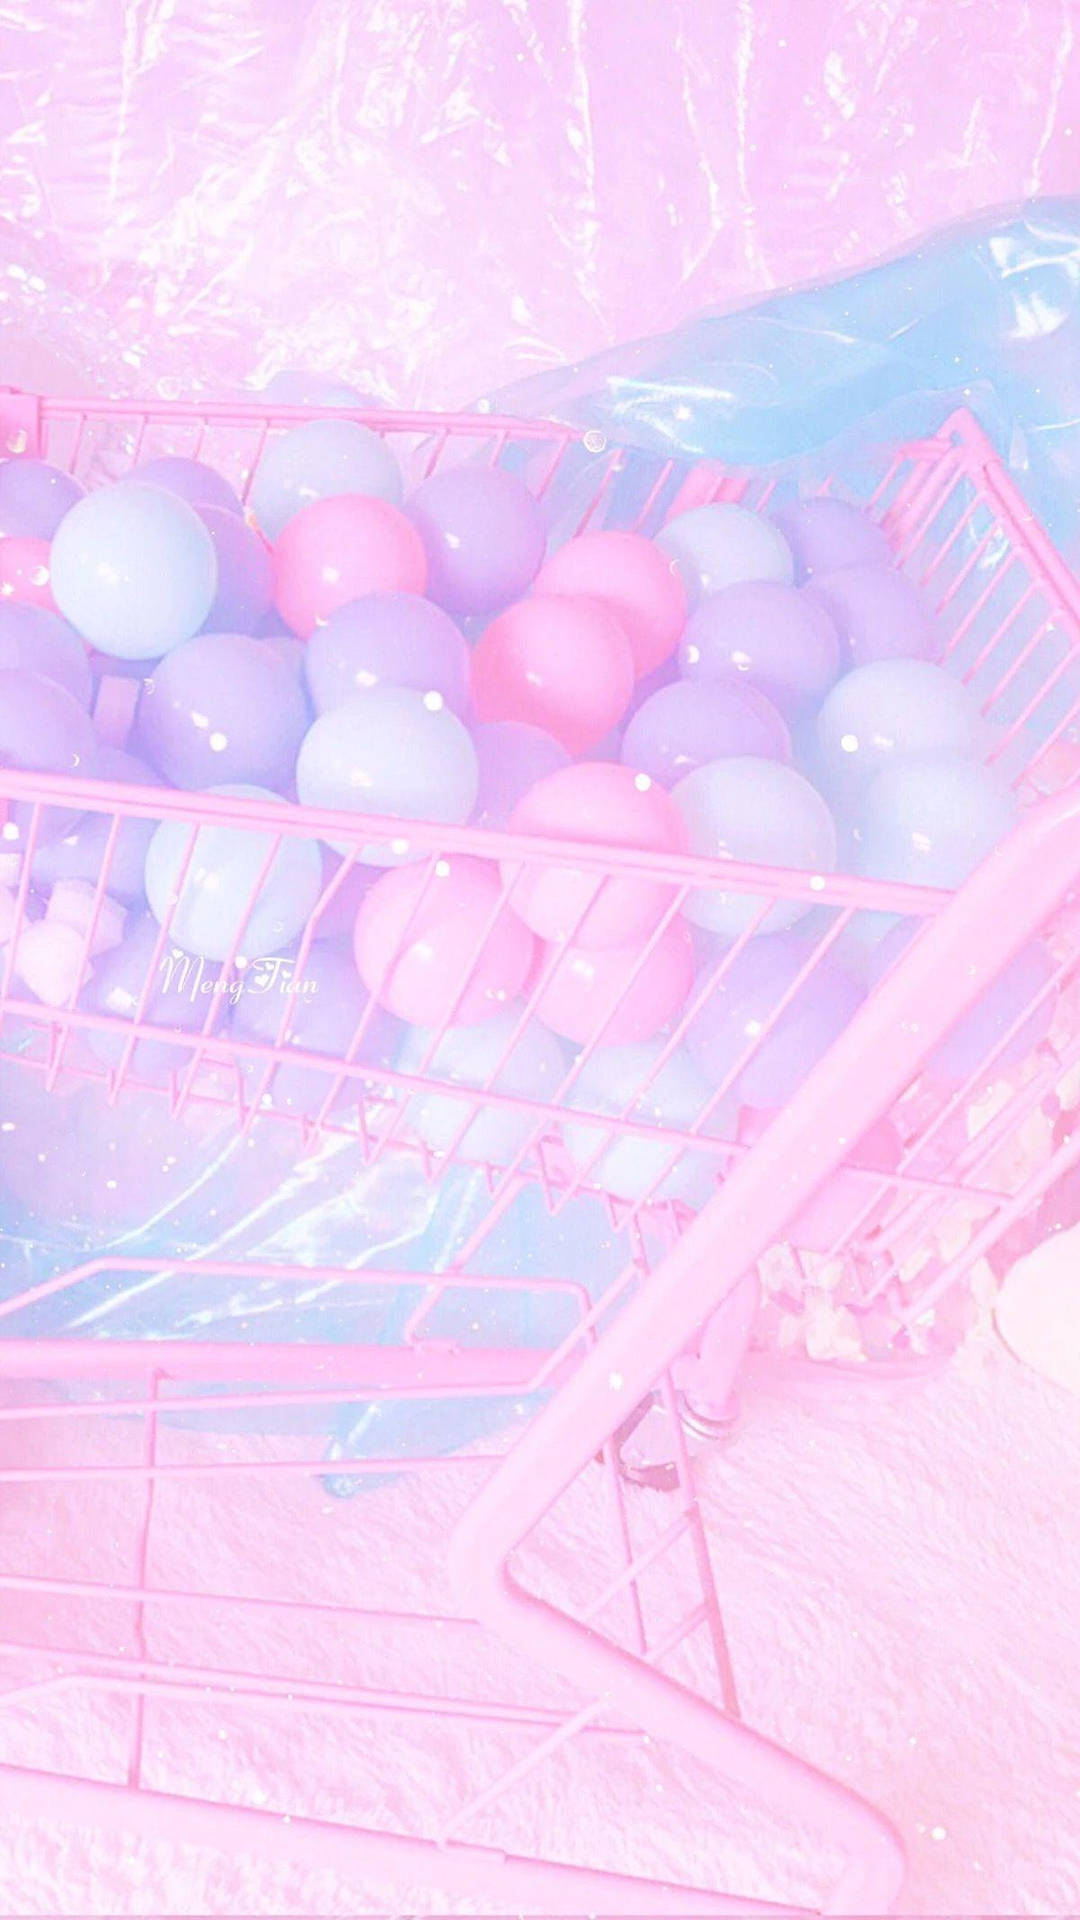 Small Balls Inside Cute And Pink Cart Background